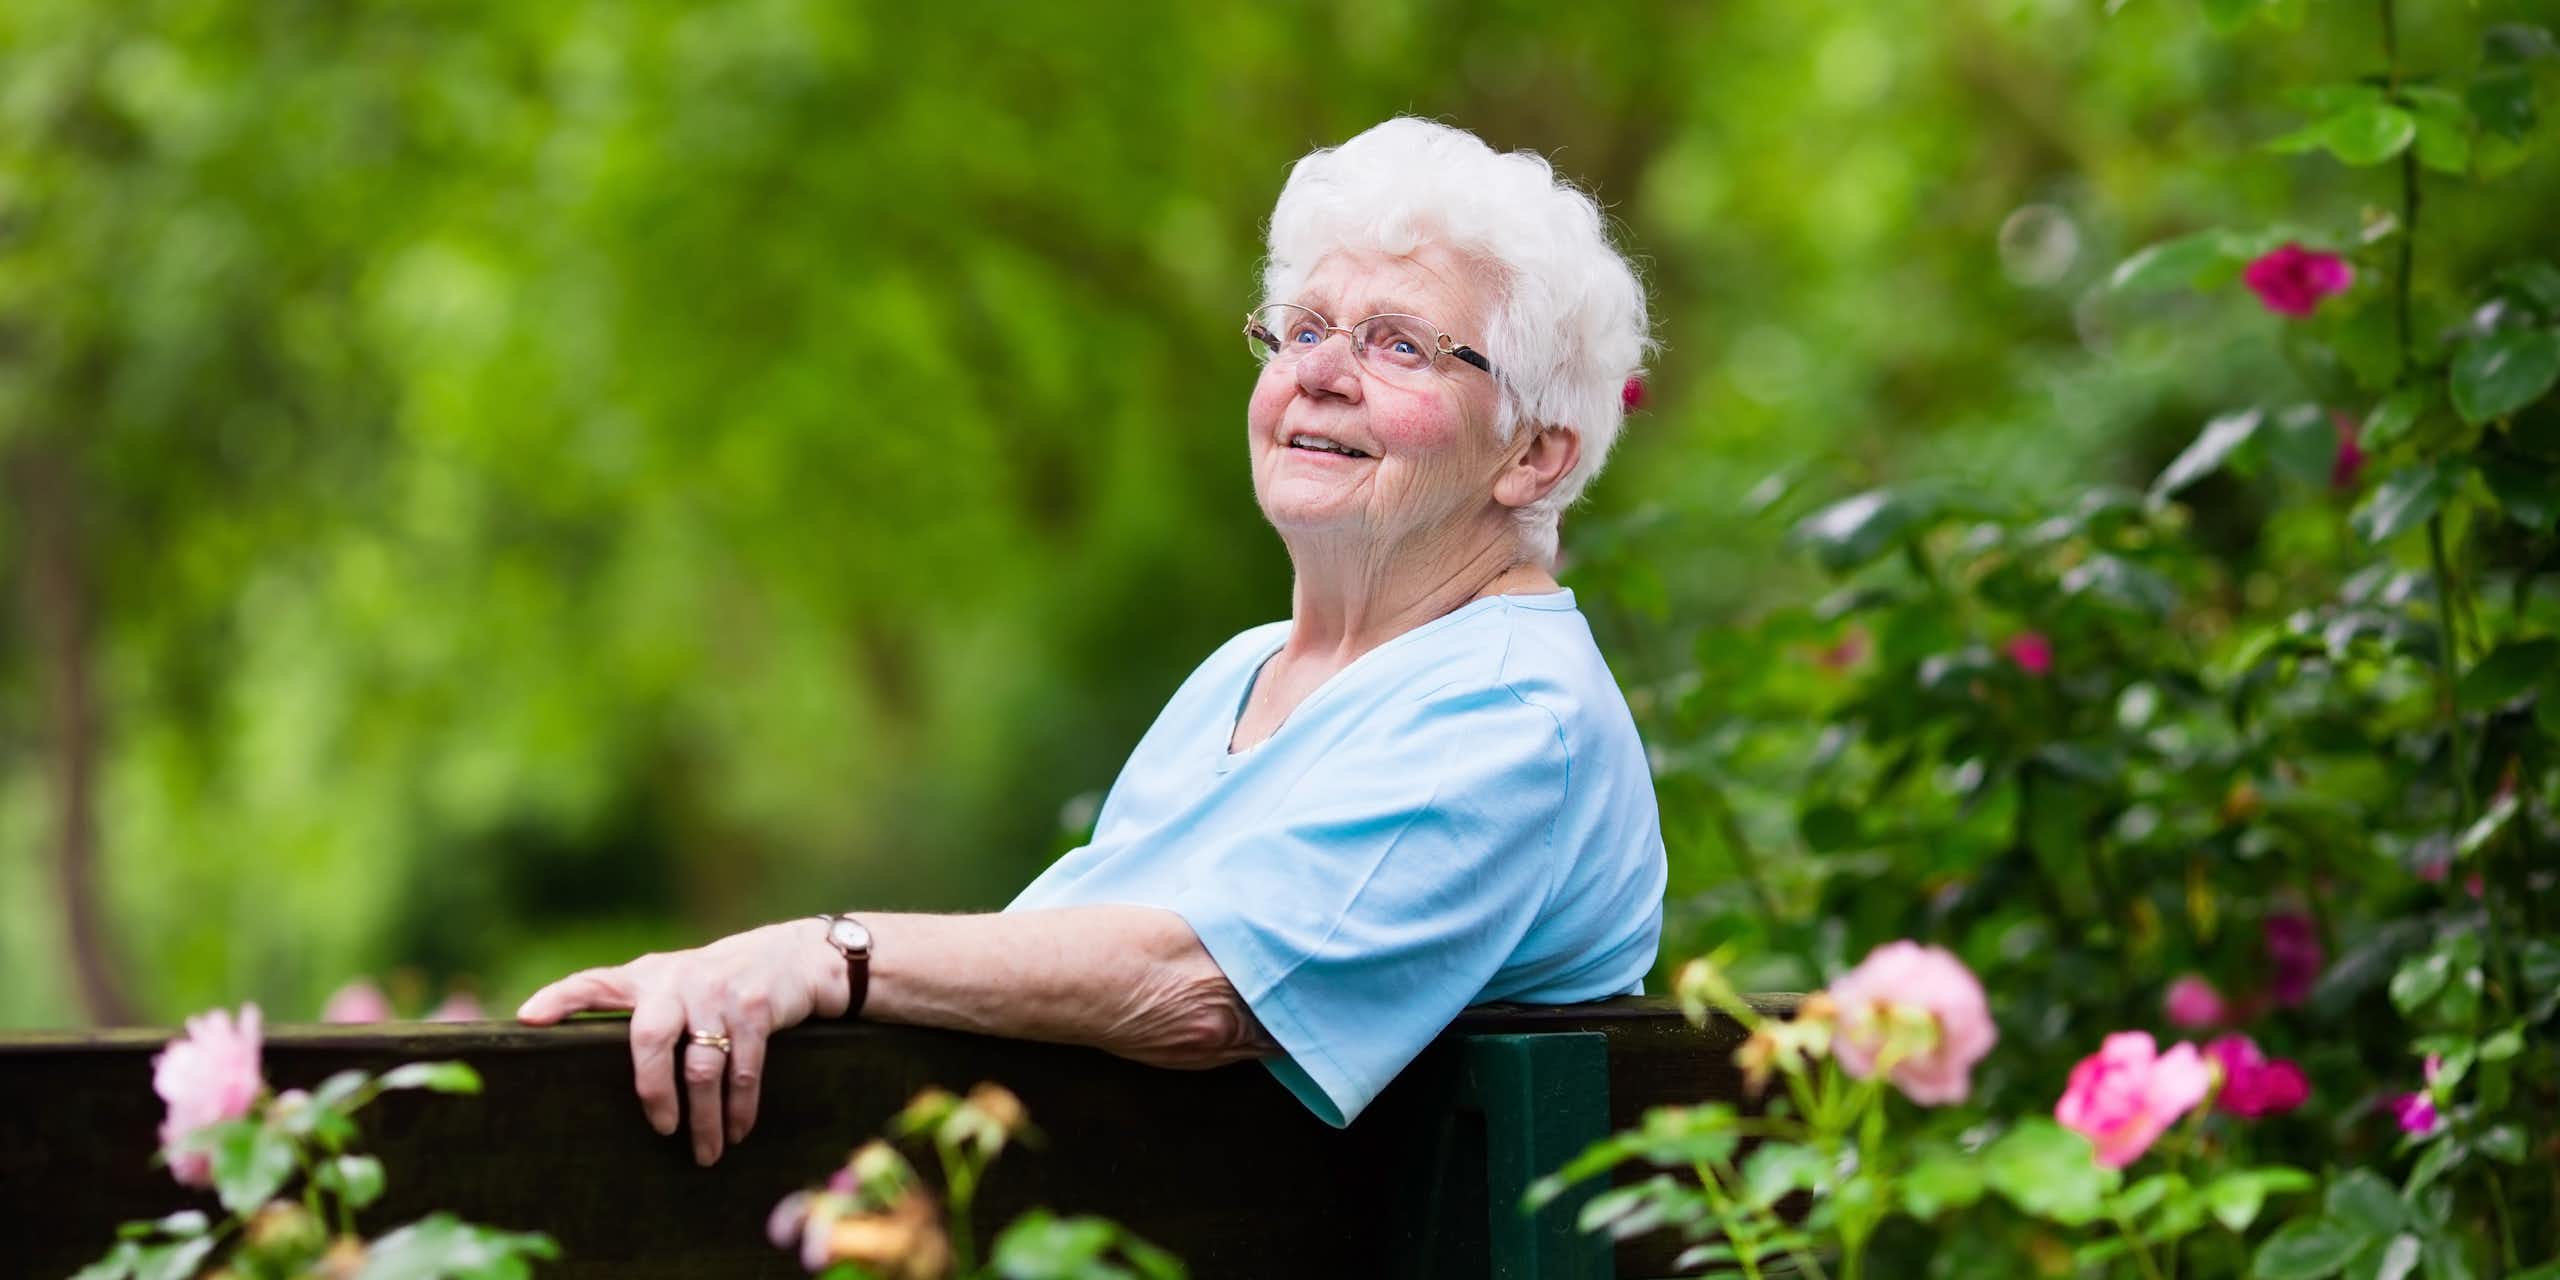 An elderly woman sitting on a bench in the garden looking happy.